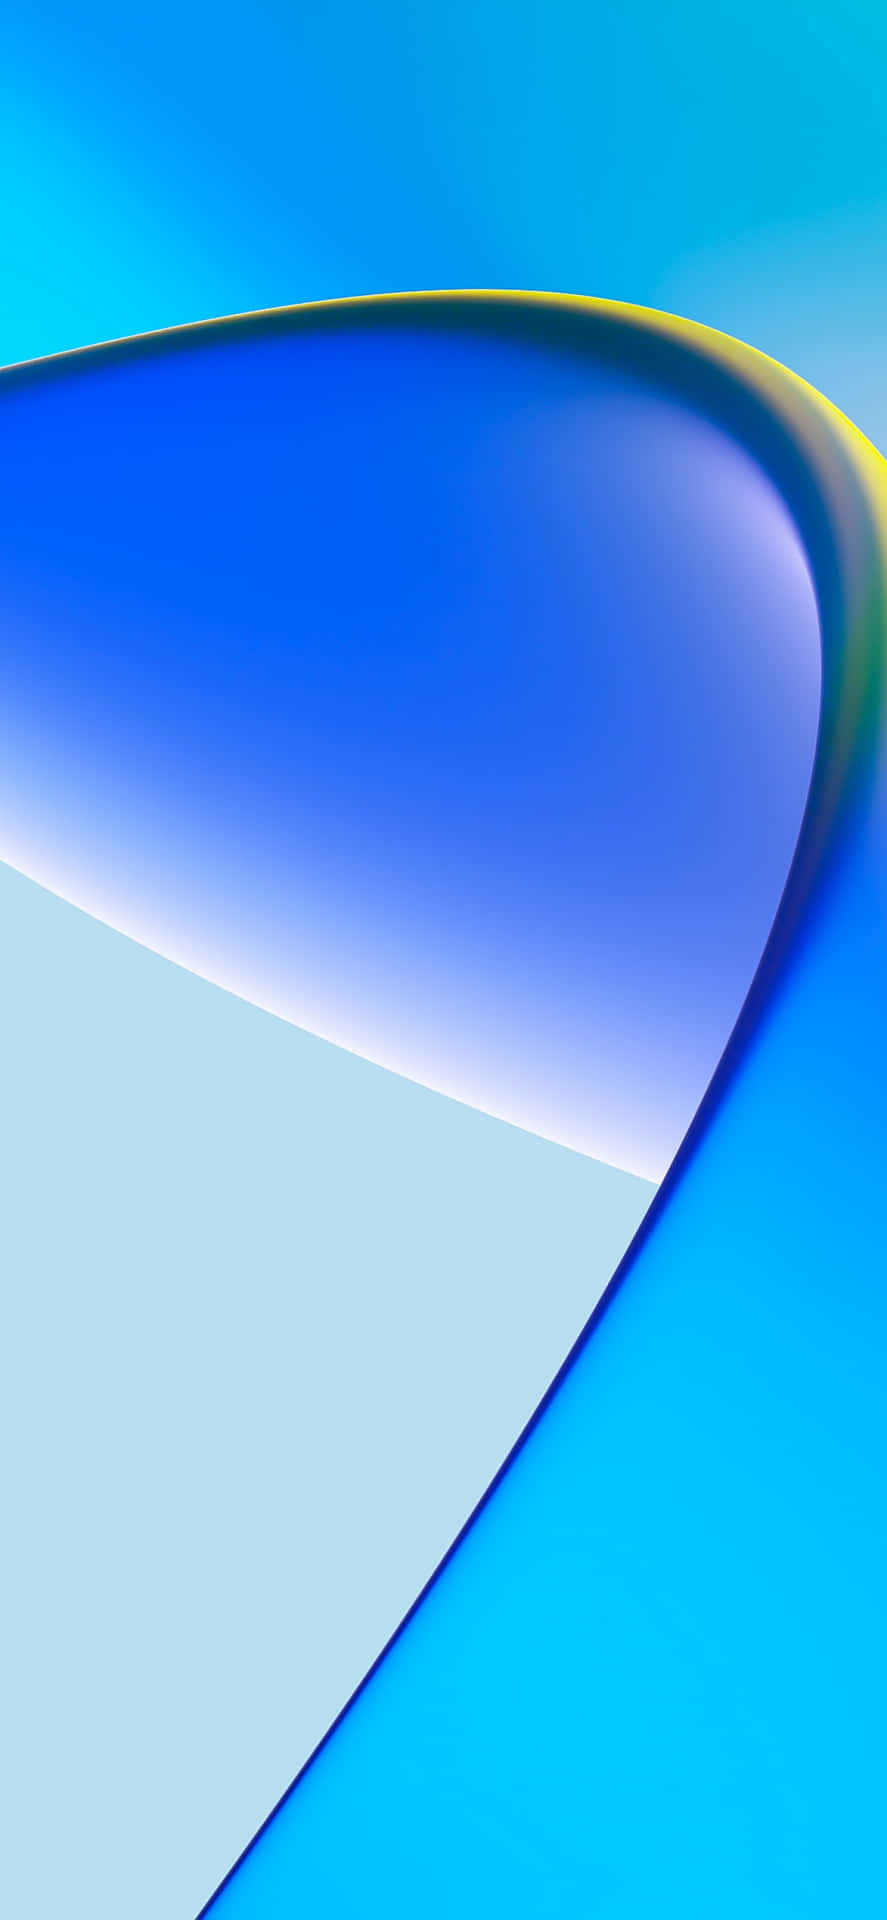 Bright and colorful abstract blue background